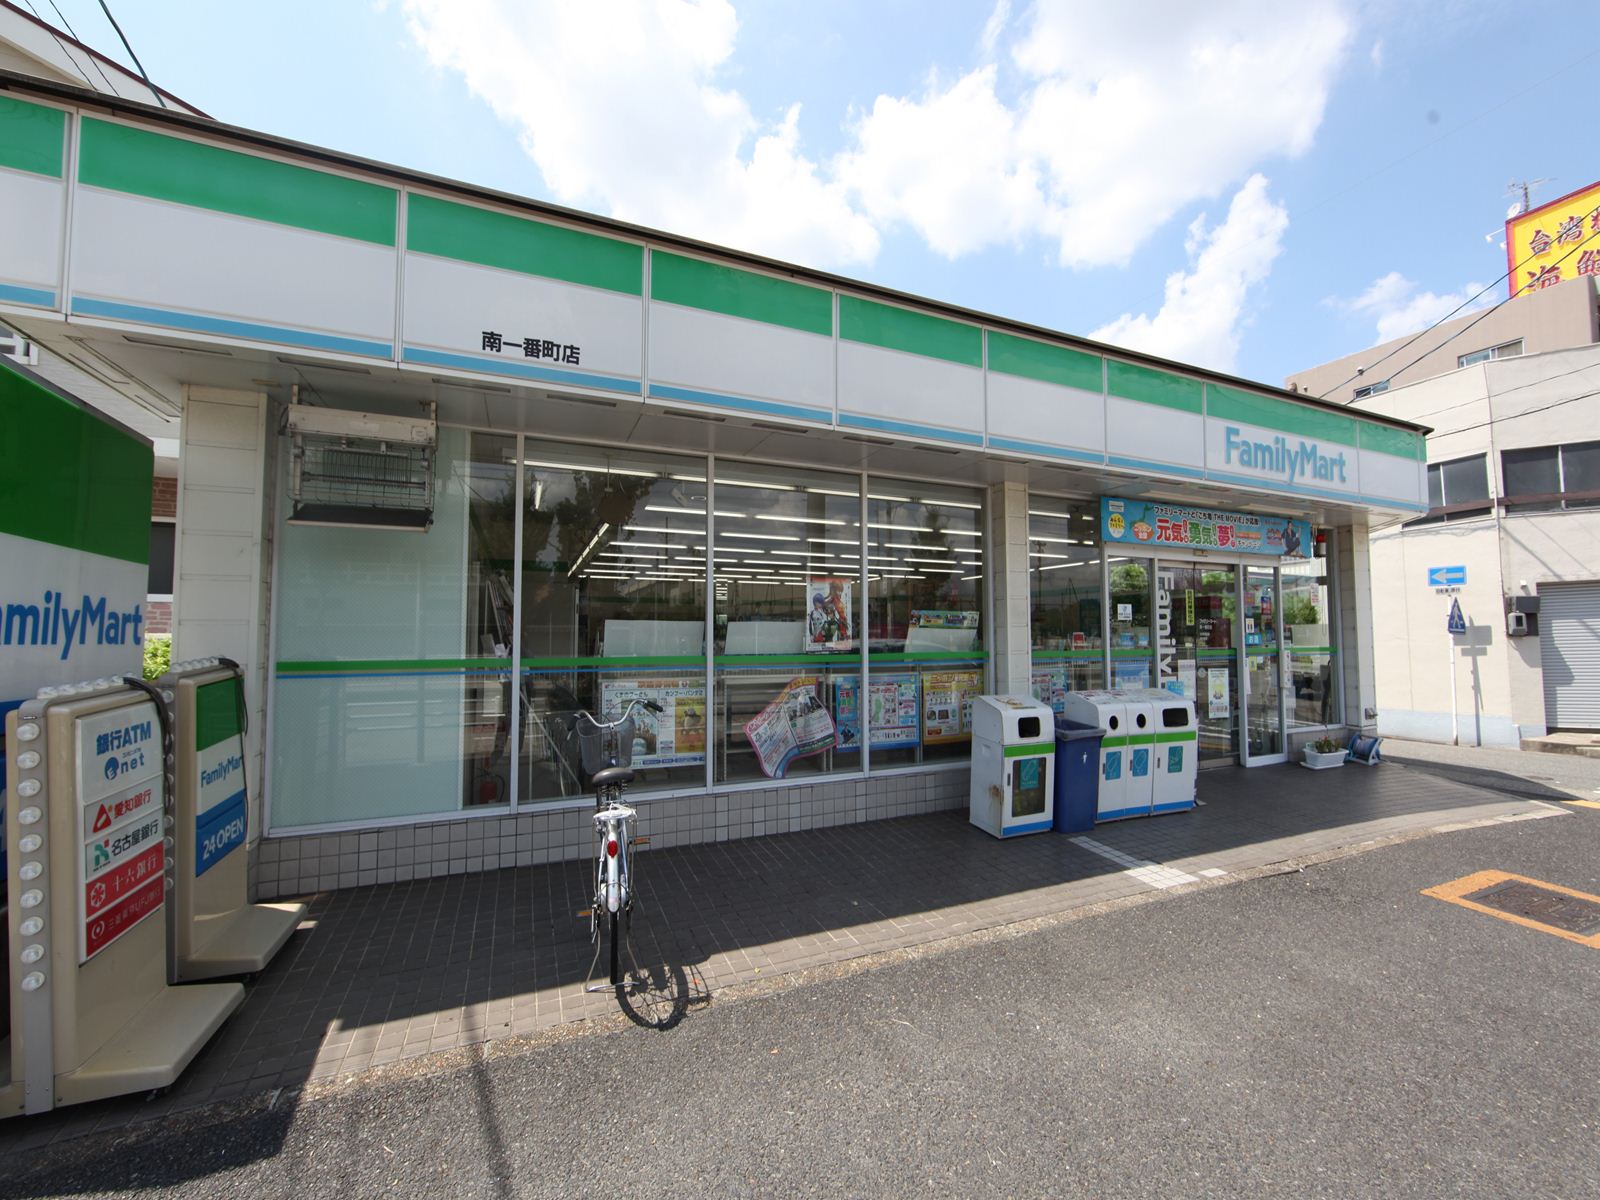 Convenience store. 346m to FamilyMart Minamiichiban the town store (convenience store)